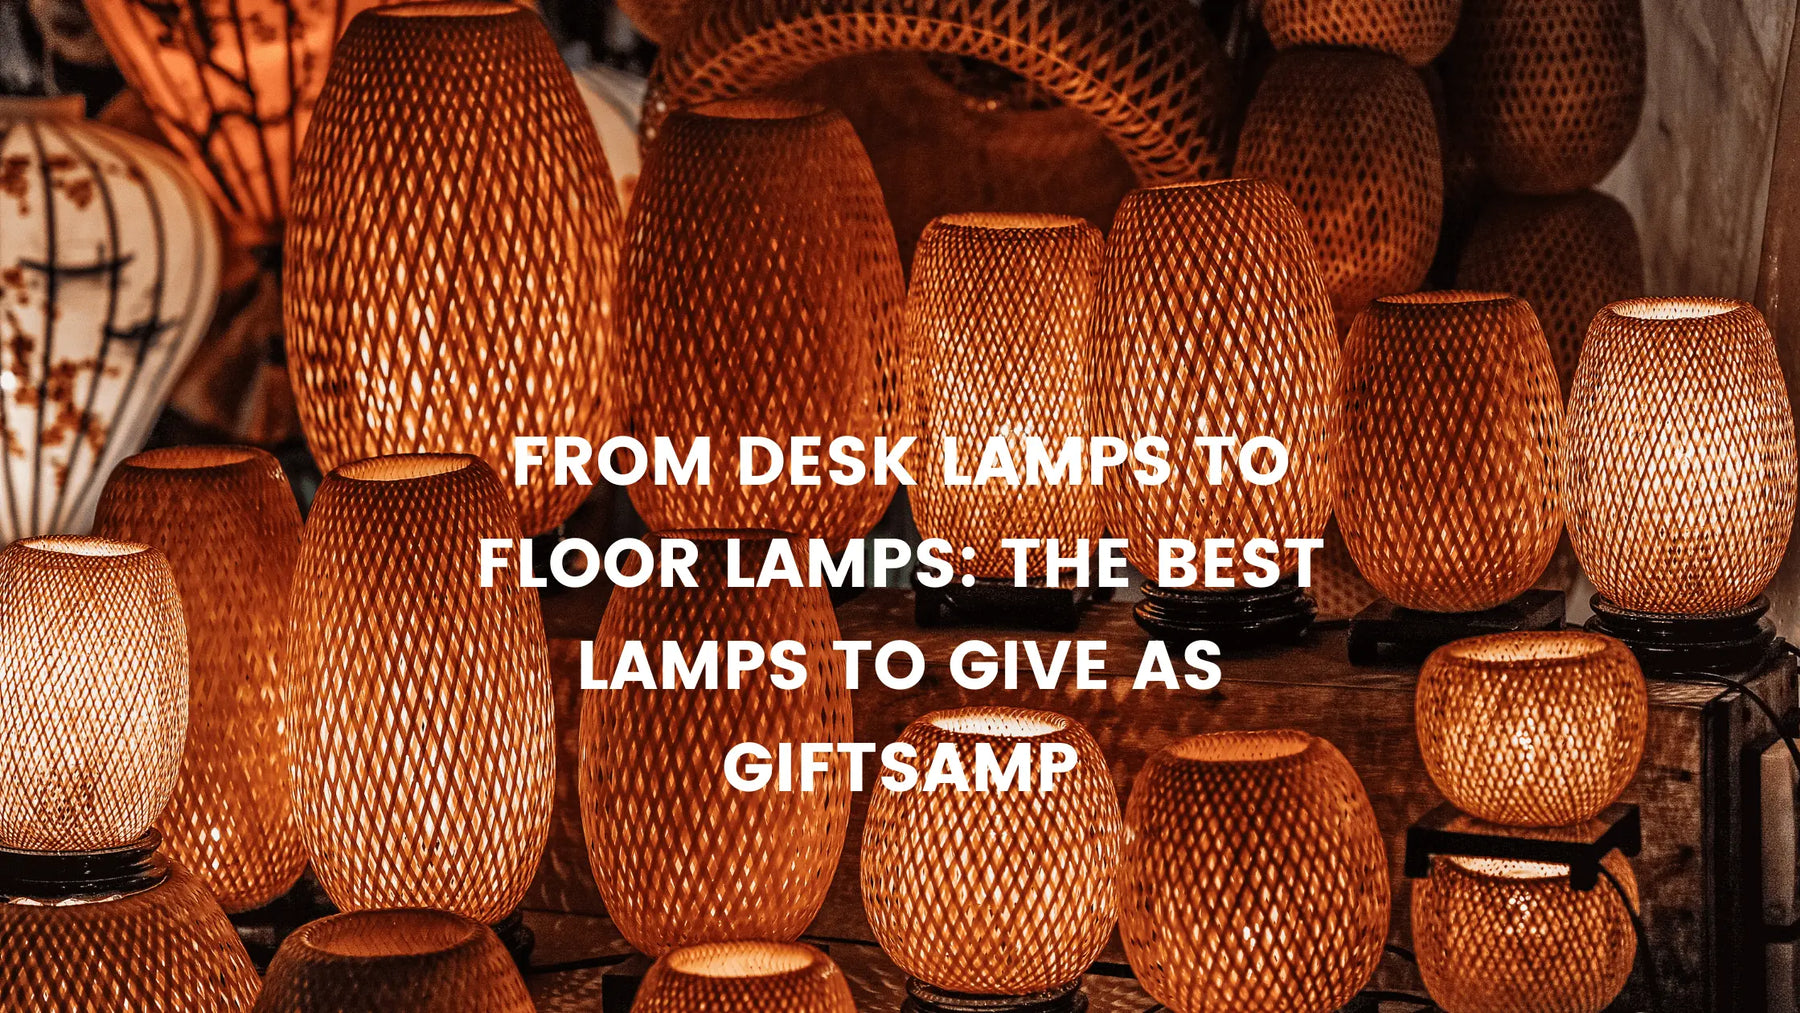 From Desk Lamps to Floor Lamps: The Best Lamps to Give as Gifts